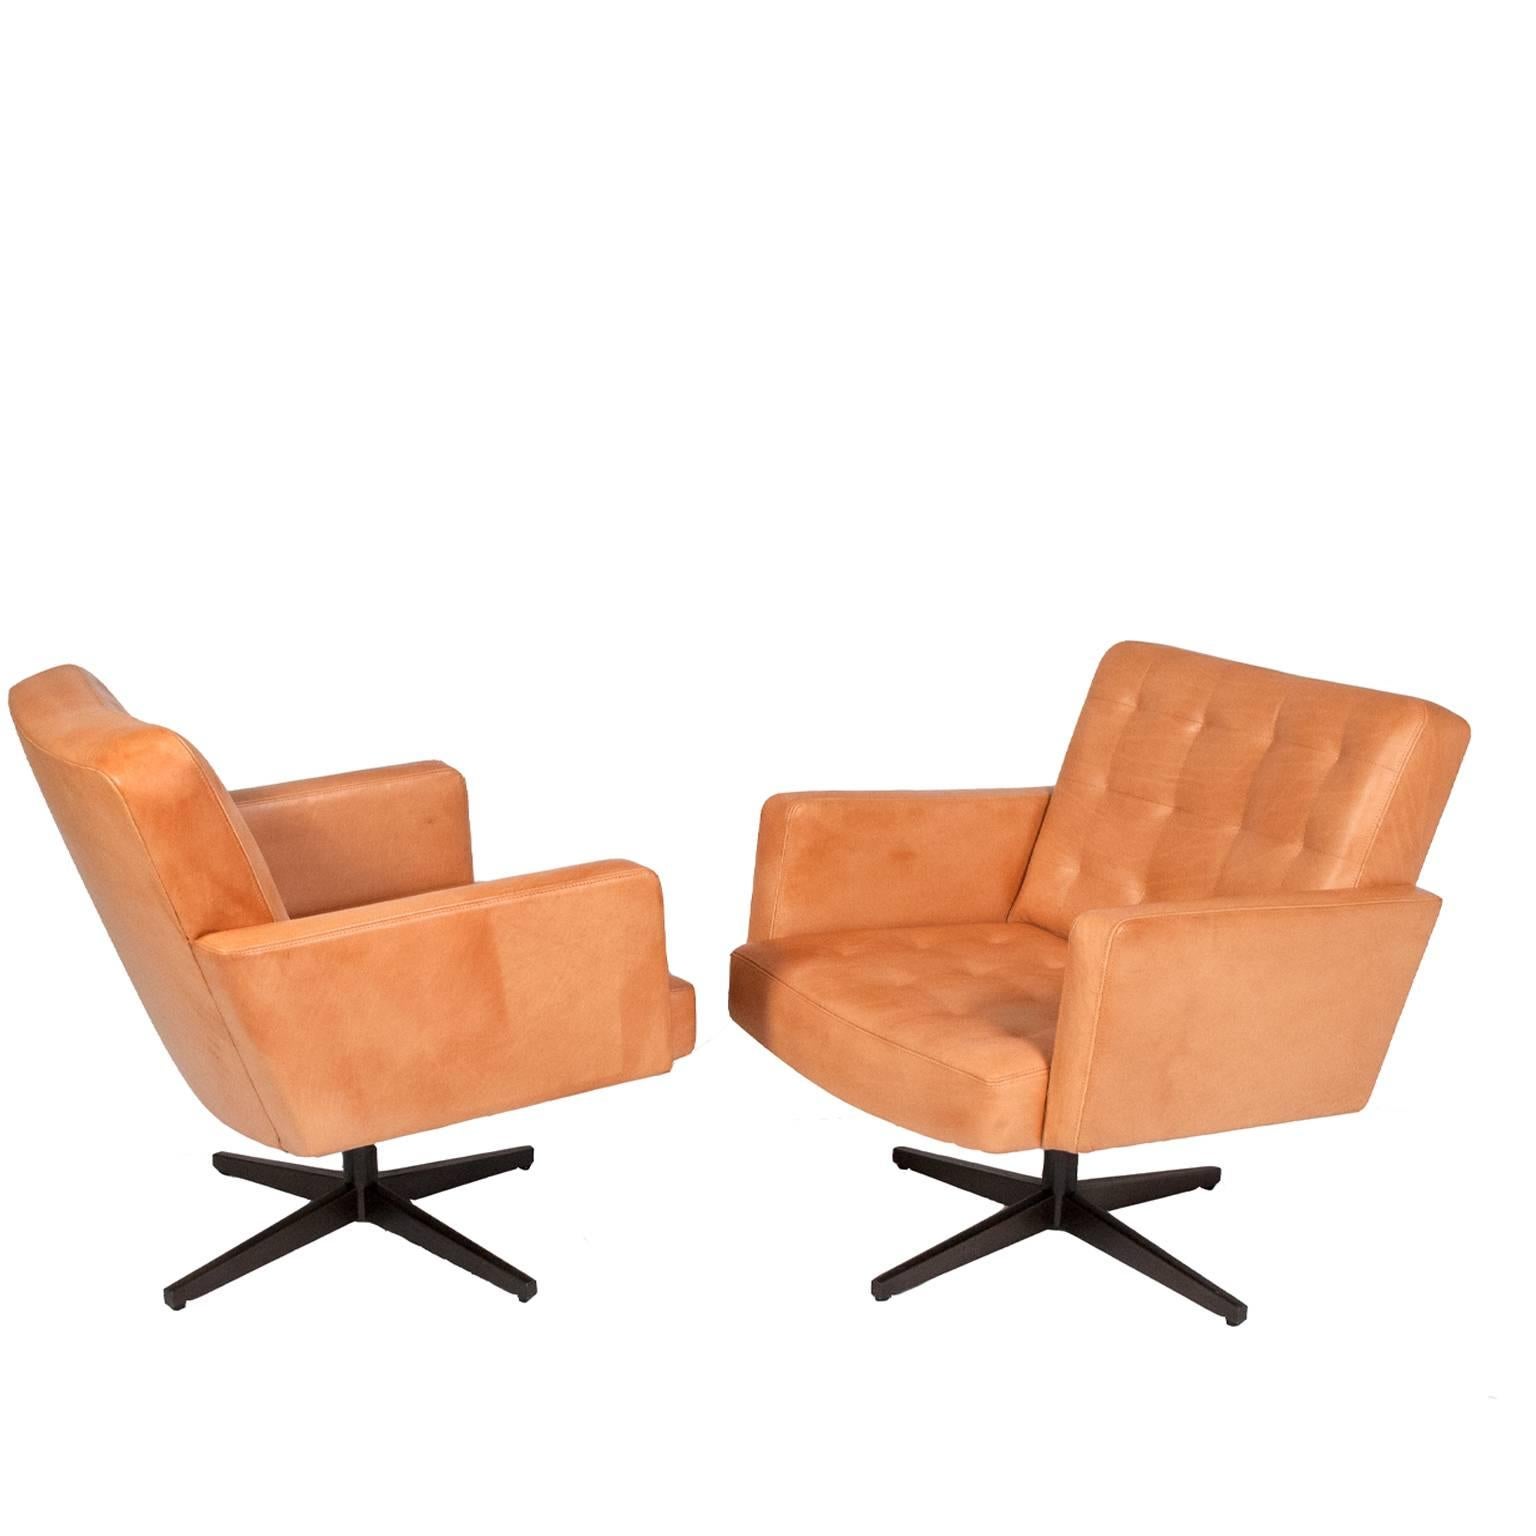 American Pair of Lounge Chairs by Vincent Cafiero for Knoll